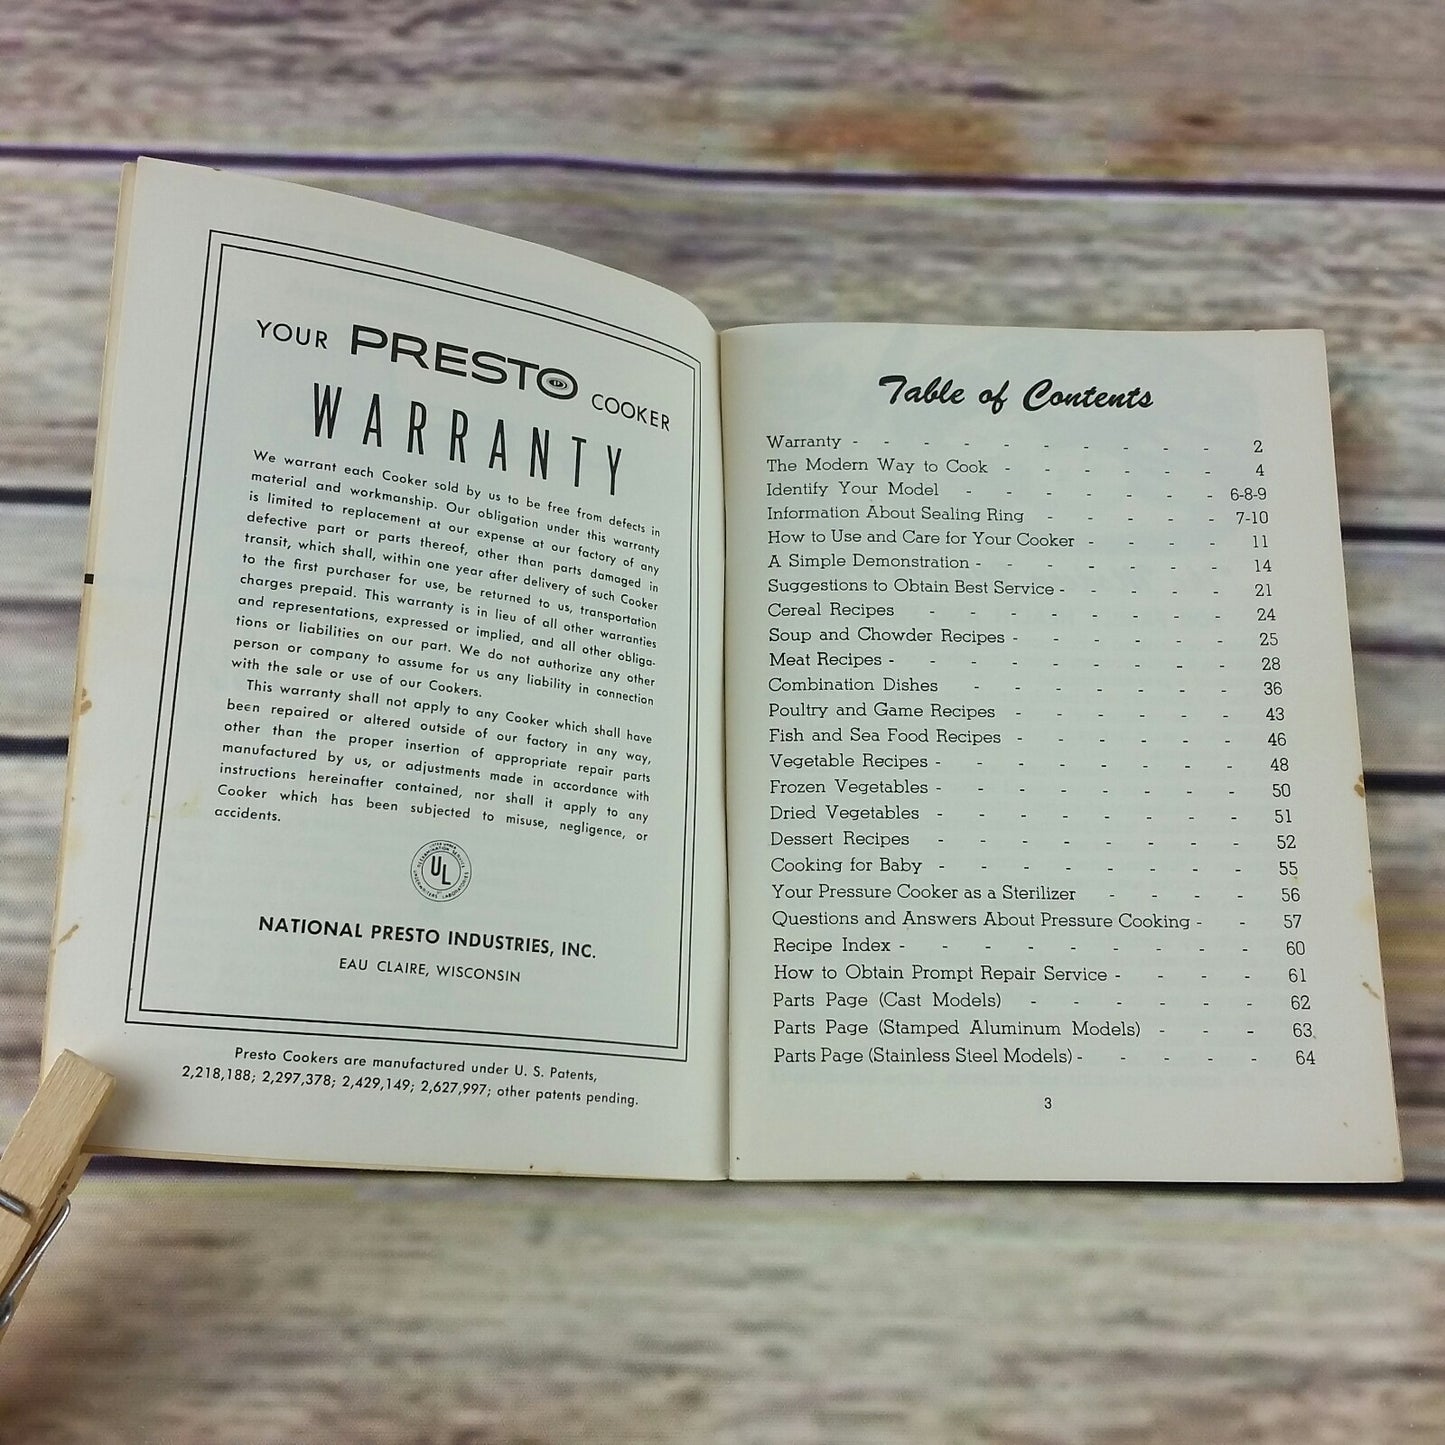 Vintage Cookbook Presto Pressure Cooker Instructions Cooking Time Tables 1961 Recipes Manual Booklet - At Grandma's Table